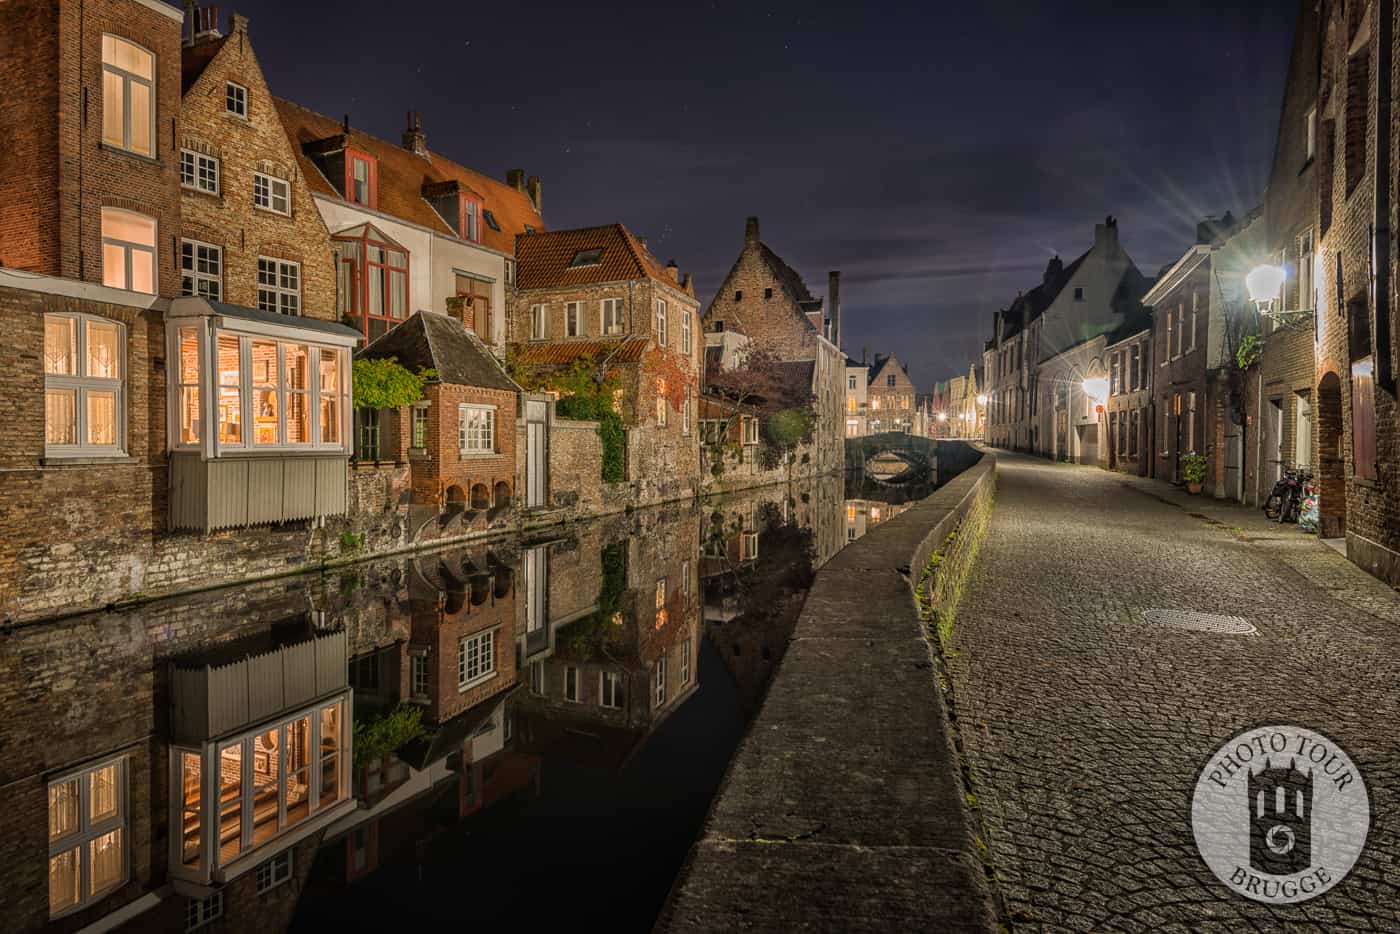 The Golden Hand (Goulden Hand) canal is lit up in Bruges Belgium. Photo by Photo Tour Brugge.